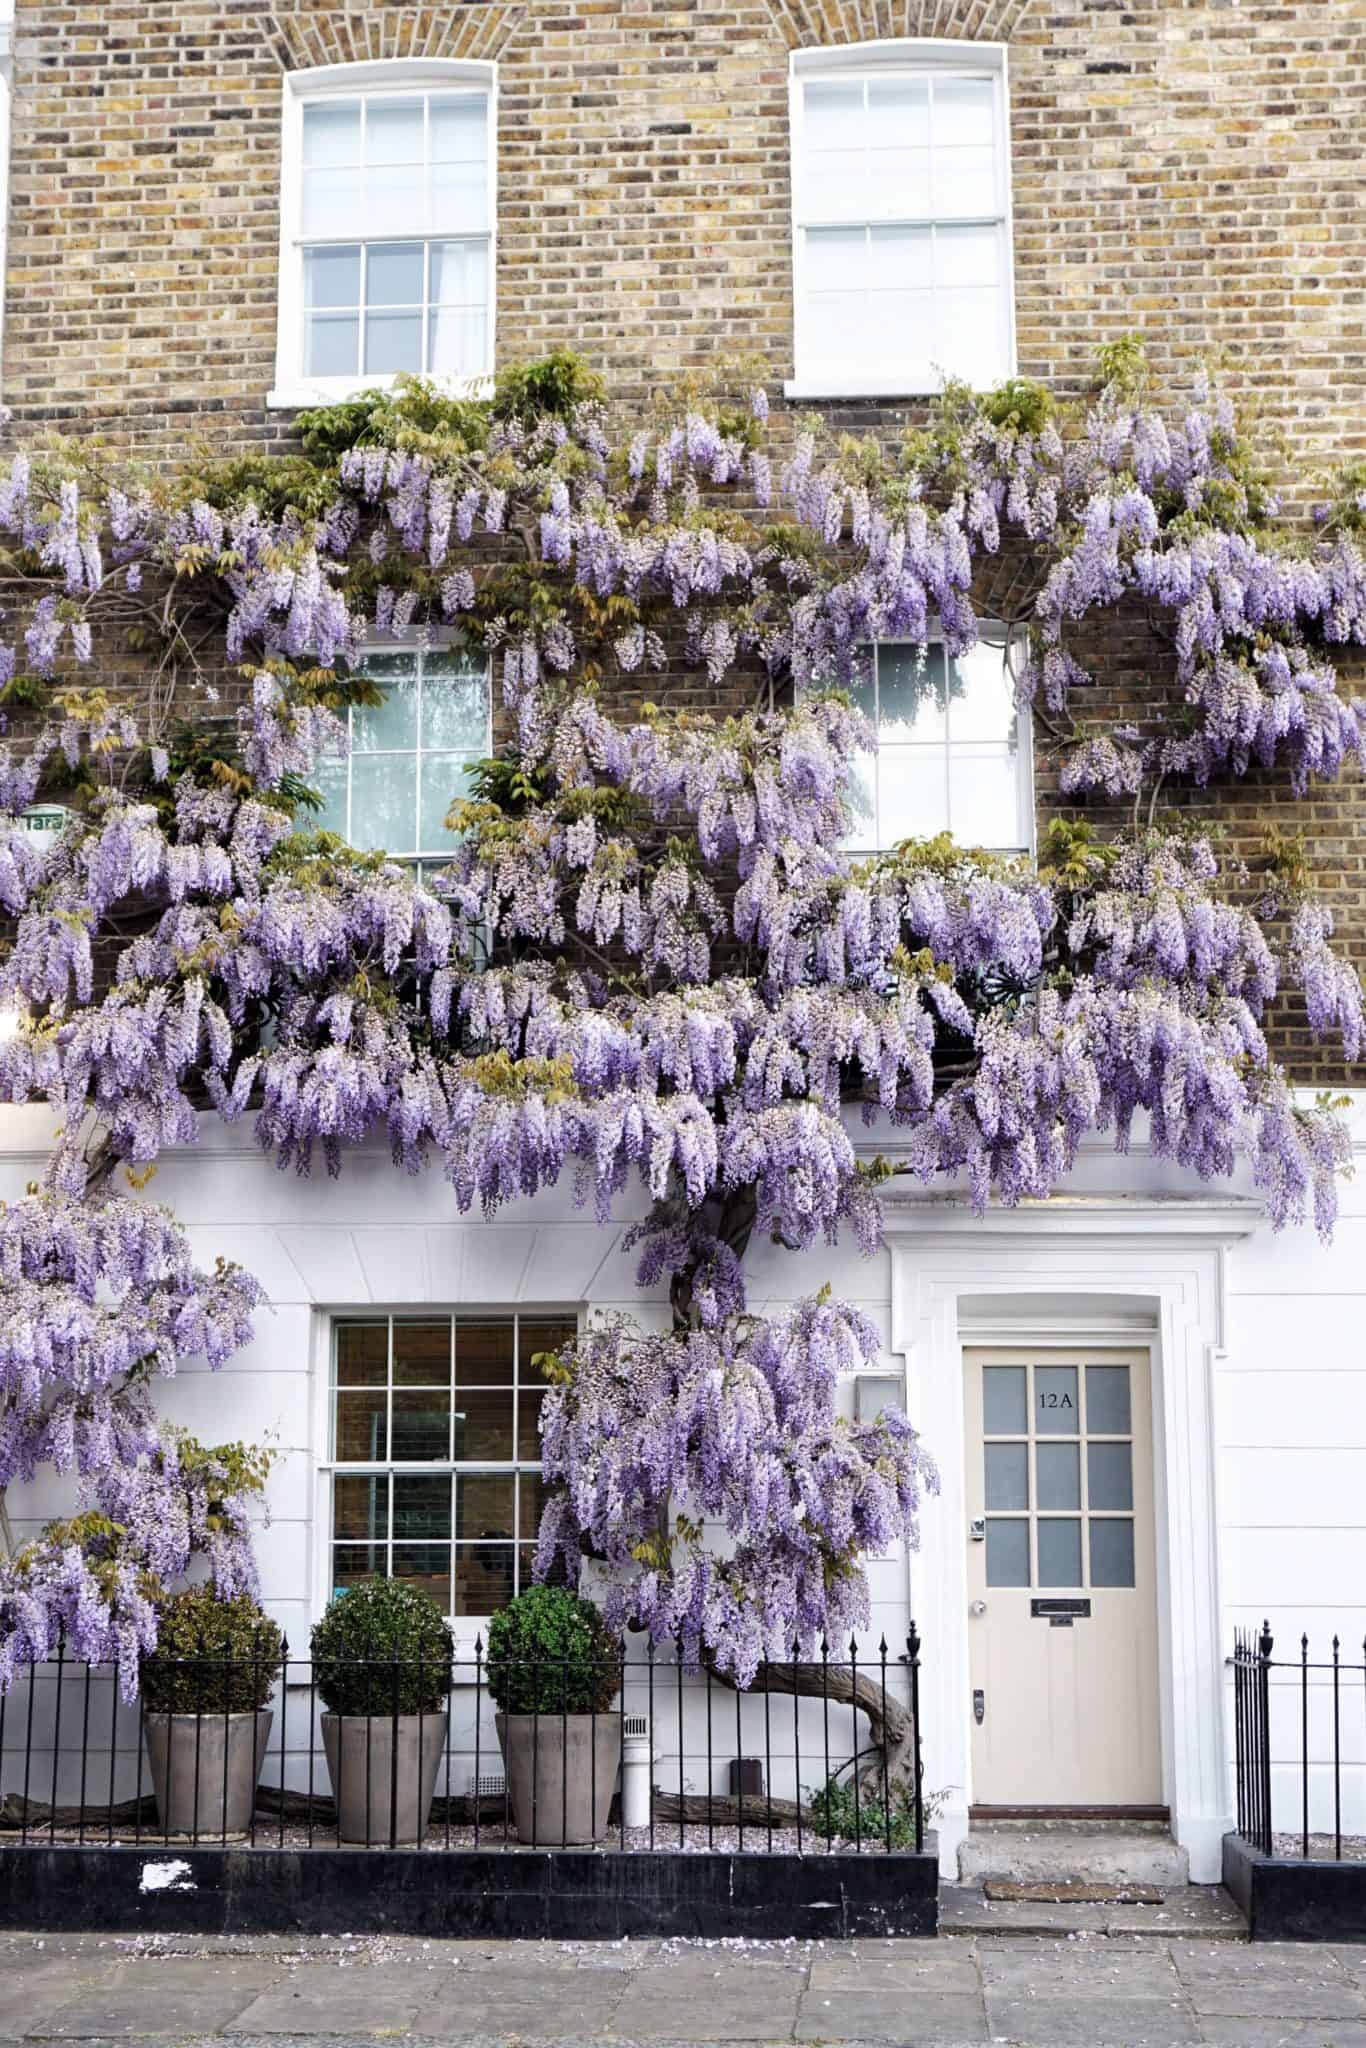 A guide to finding wisteria in London England